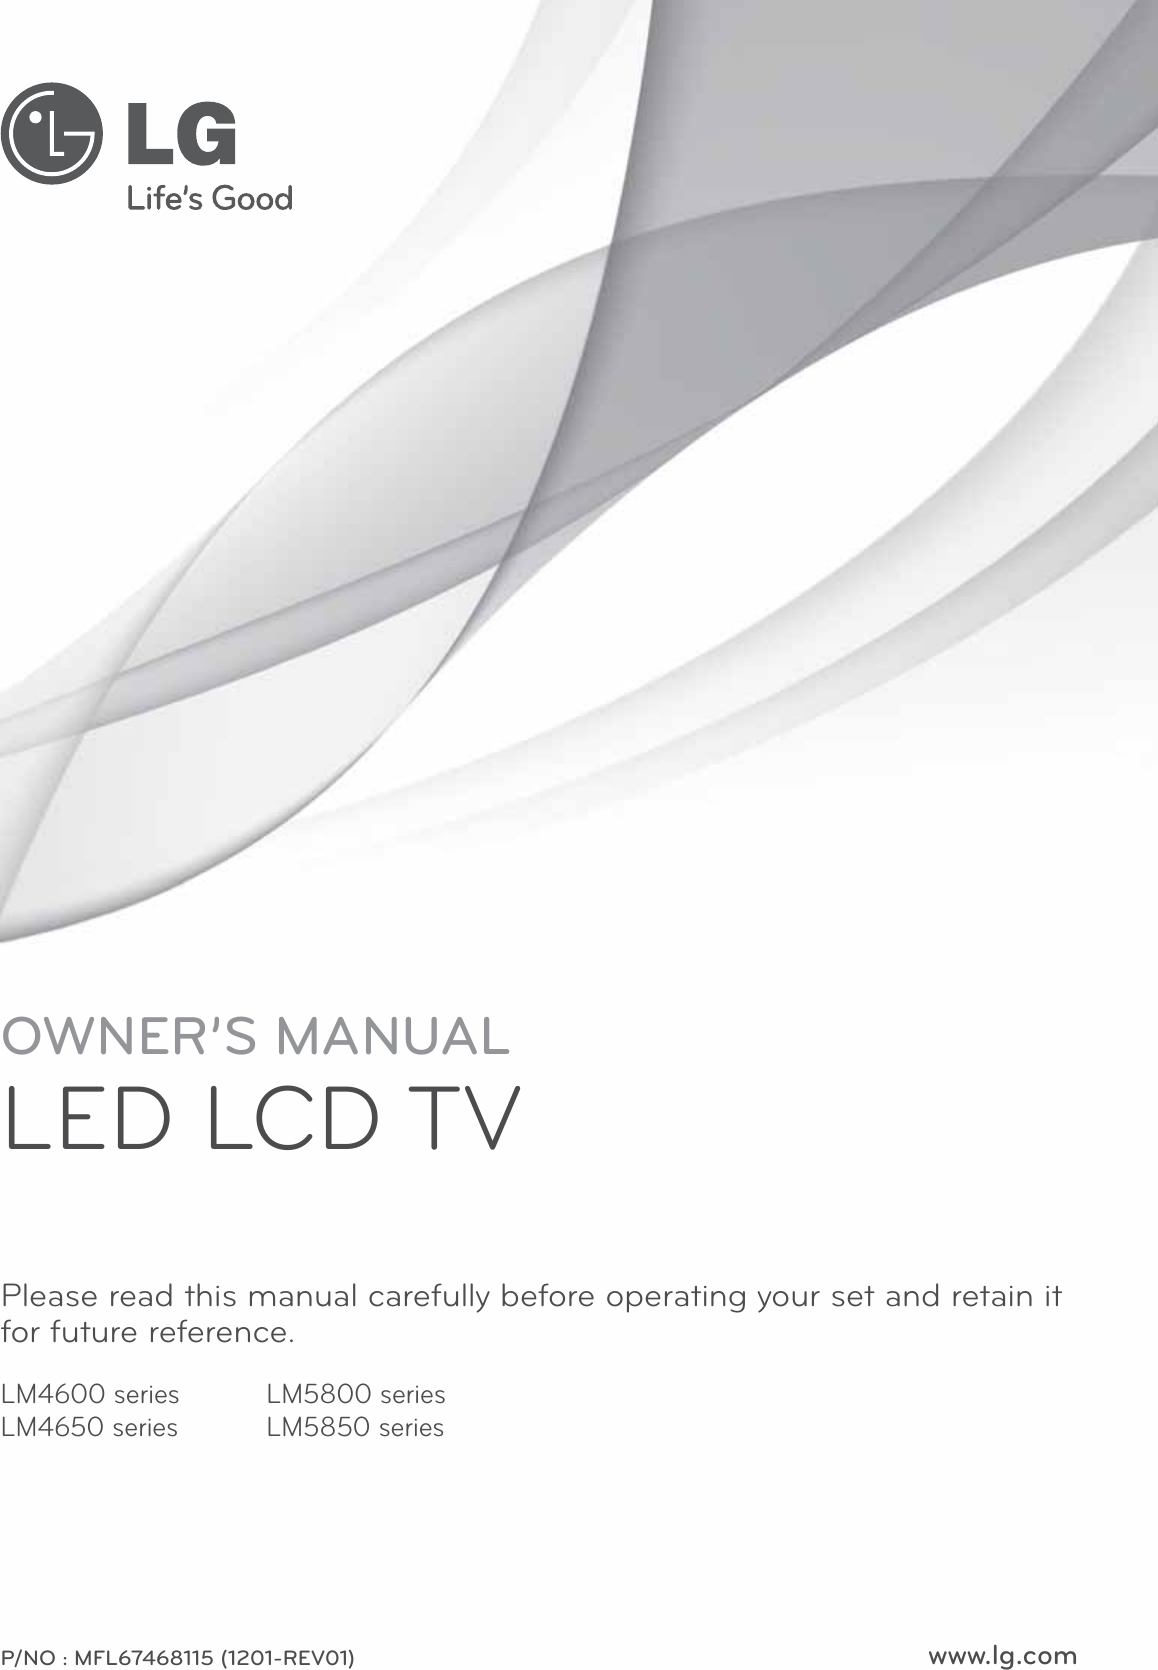 www.lg.comOWNER’S MANUALLED LCD TVPlease read this manual carefully before operating your set and retain it for future reference.P/NO : MFL67468115 (1201-REV01)LM5800 seriesLM5850 seriesLM4600 seriesLM4650 series